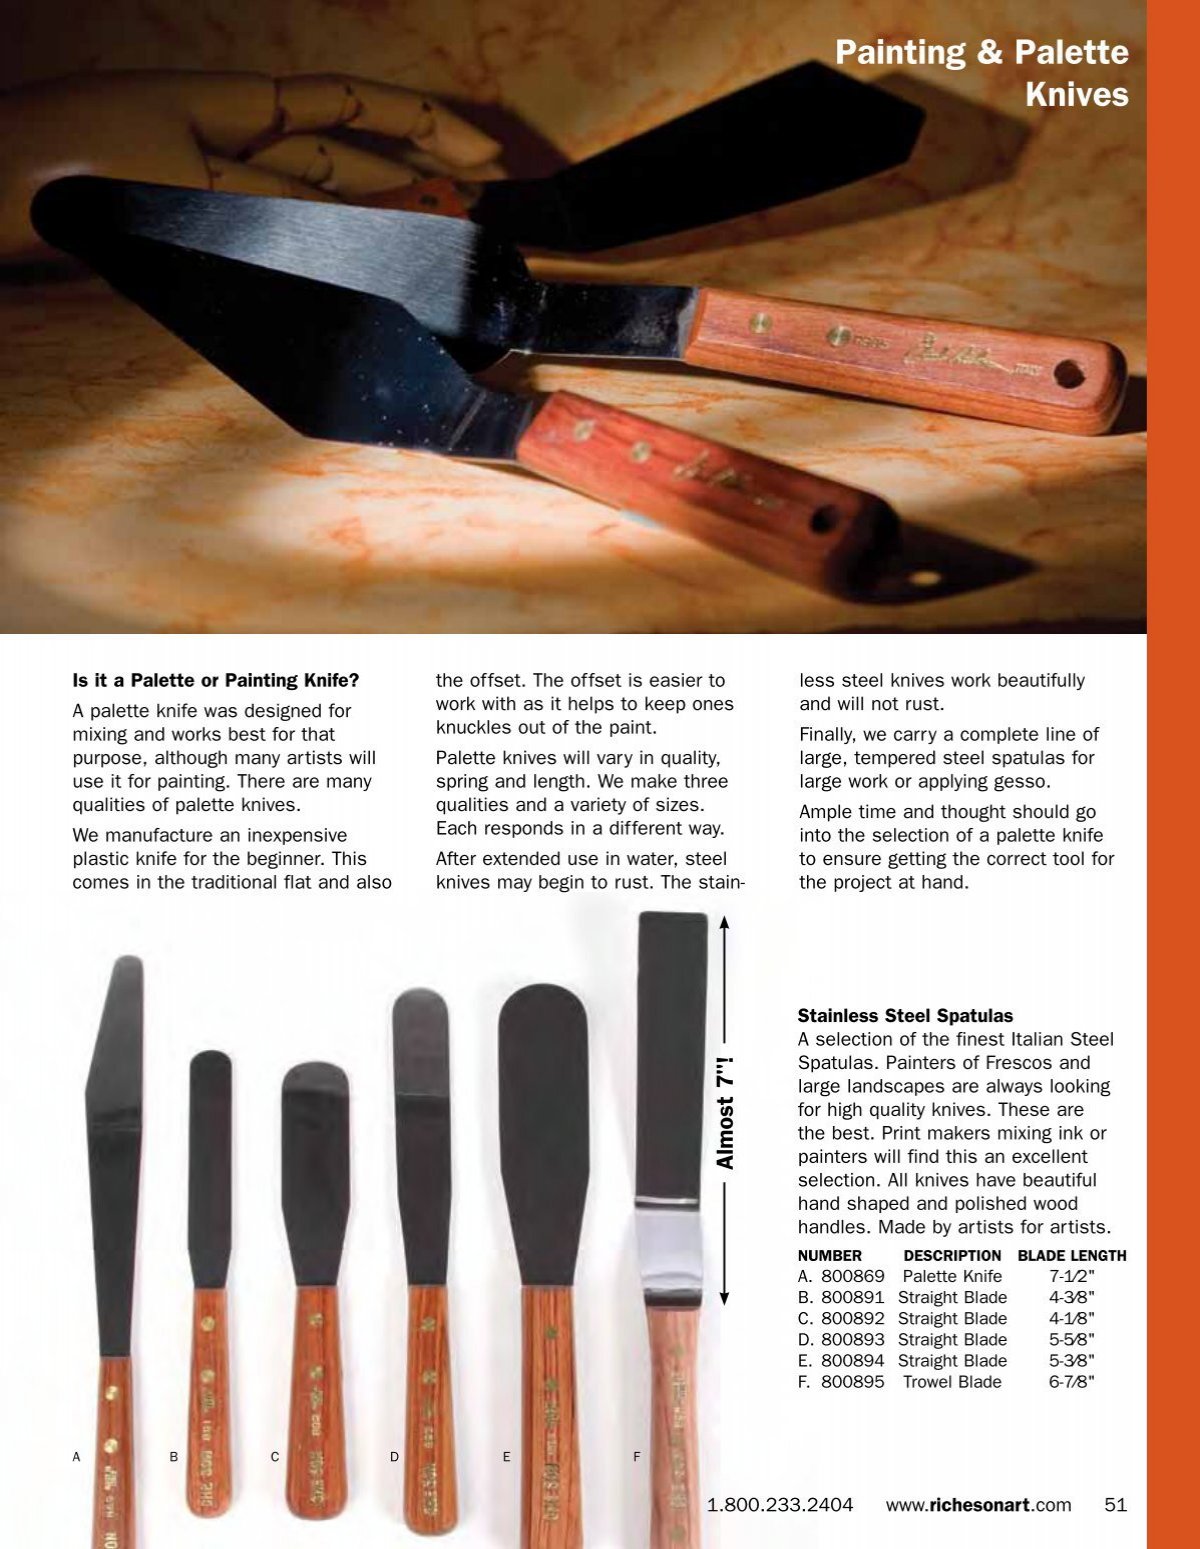 Richeson Italian Painting Knives - High quality artists paint